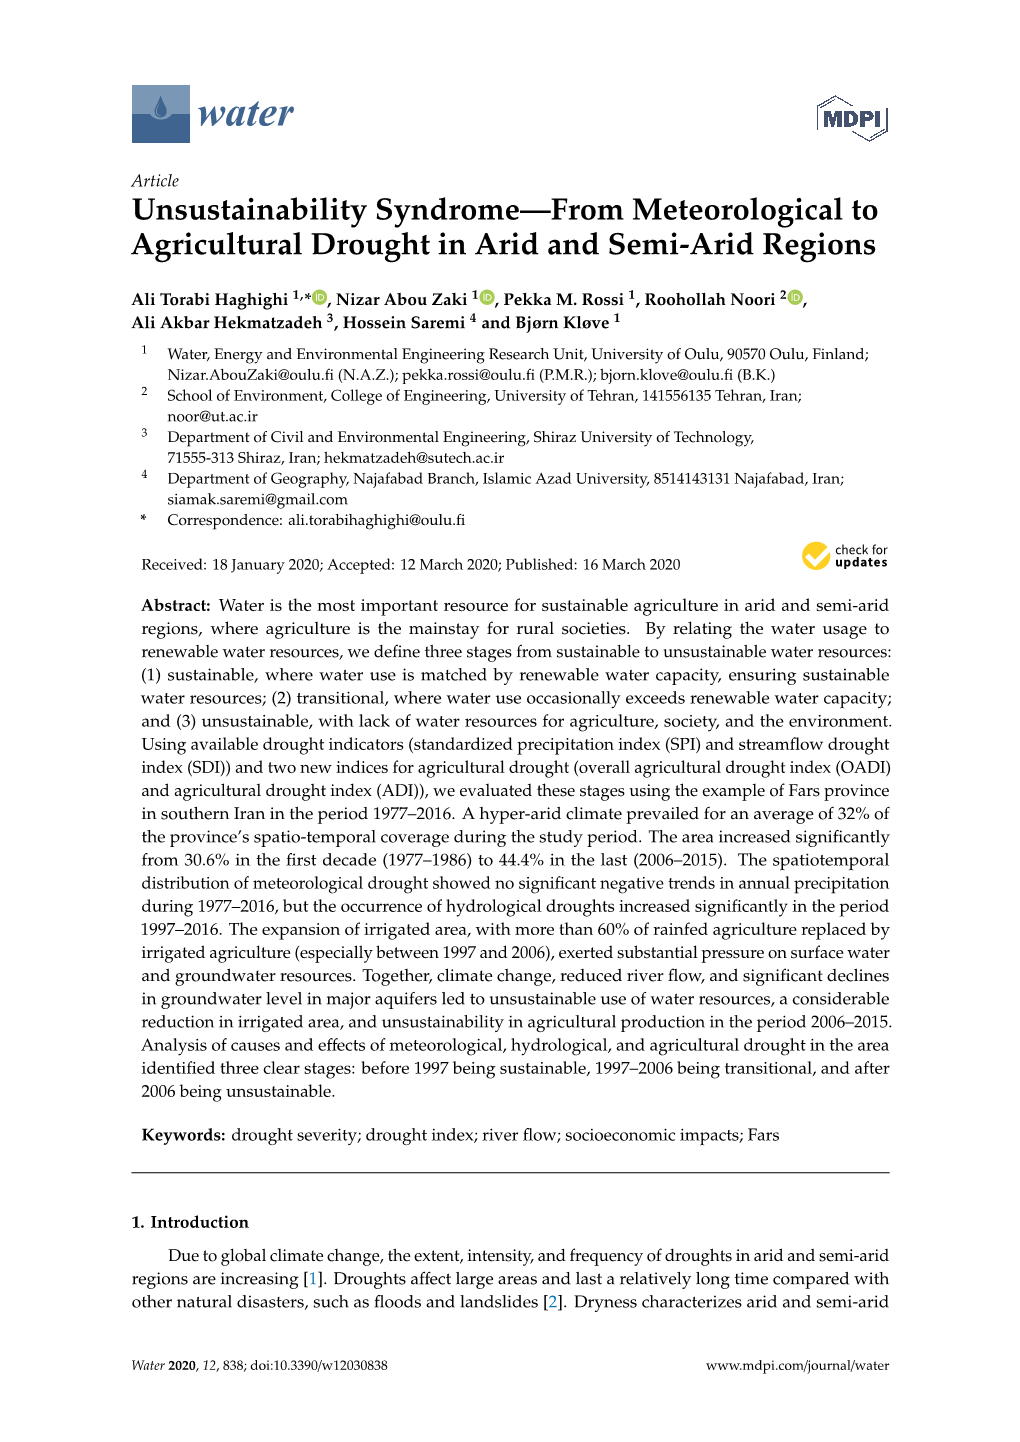 Unsustainability Syndrome—From Meteorological to Agricultural Drought in Arid and Semi-Arid Regions